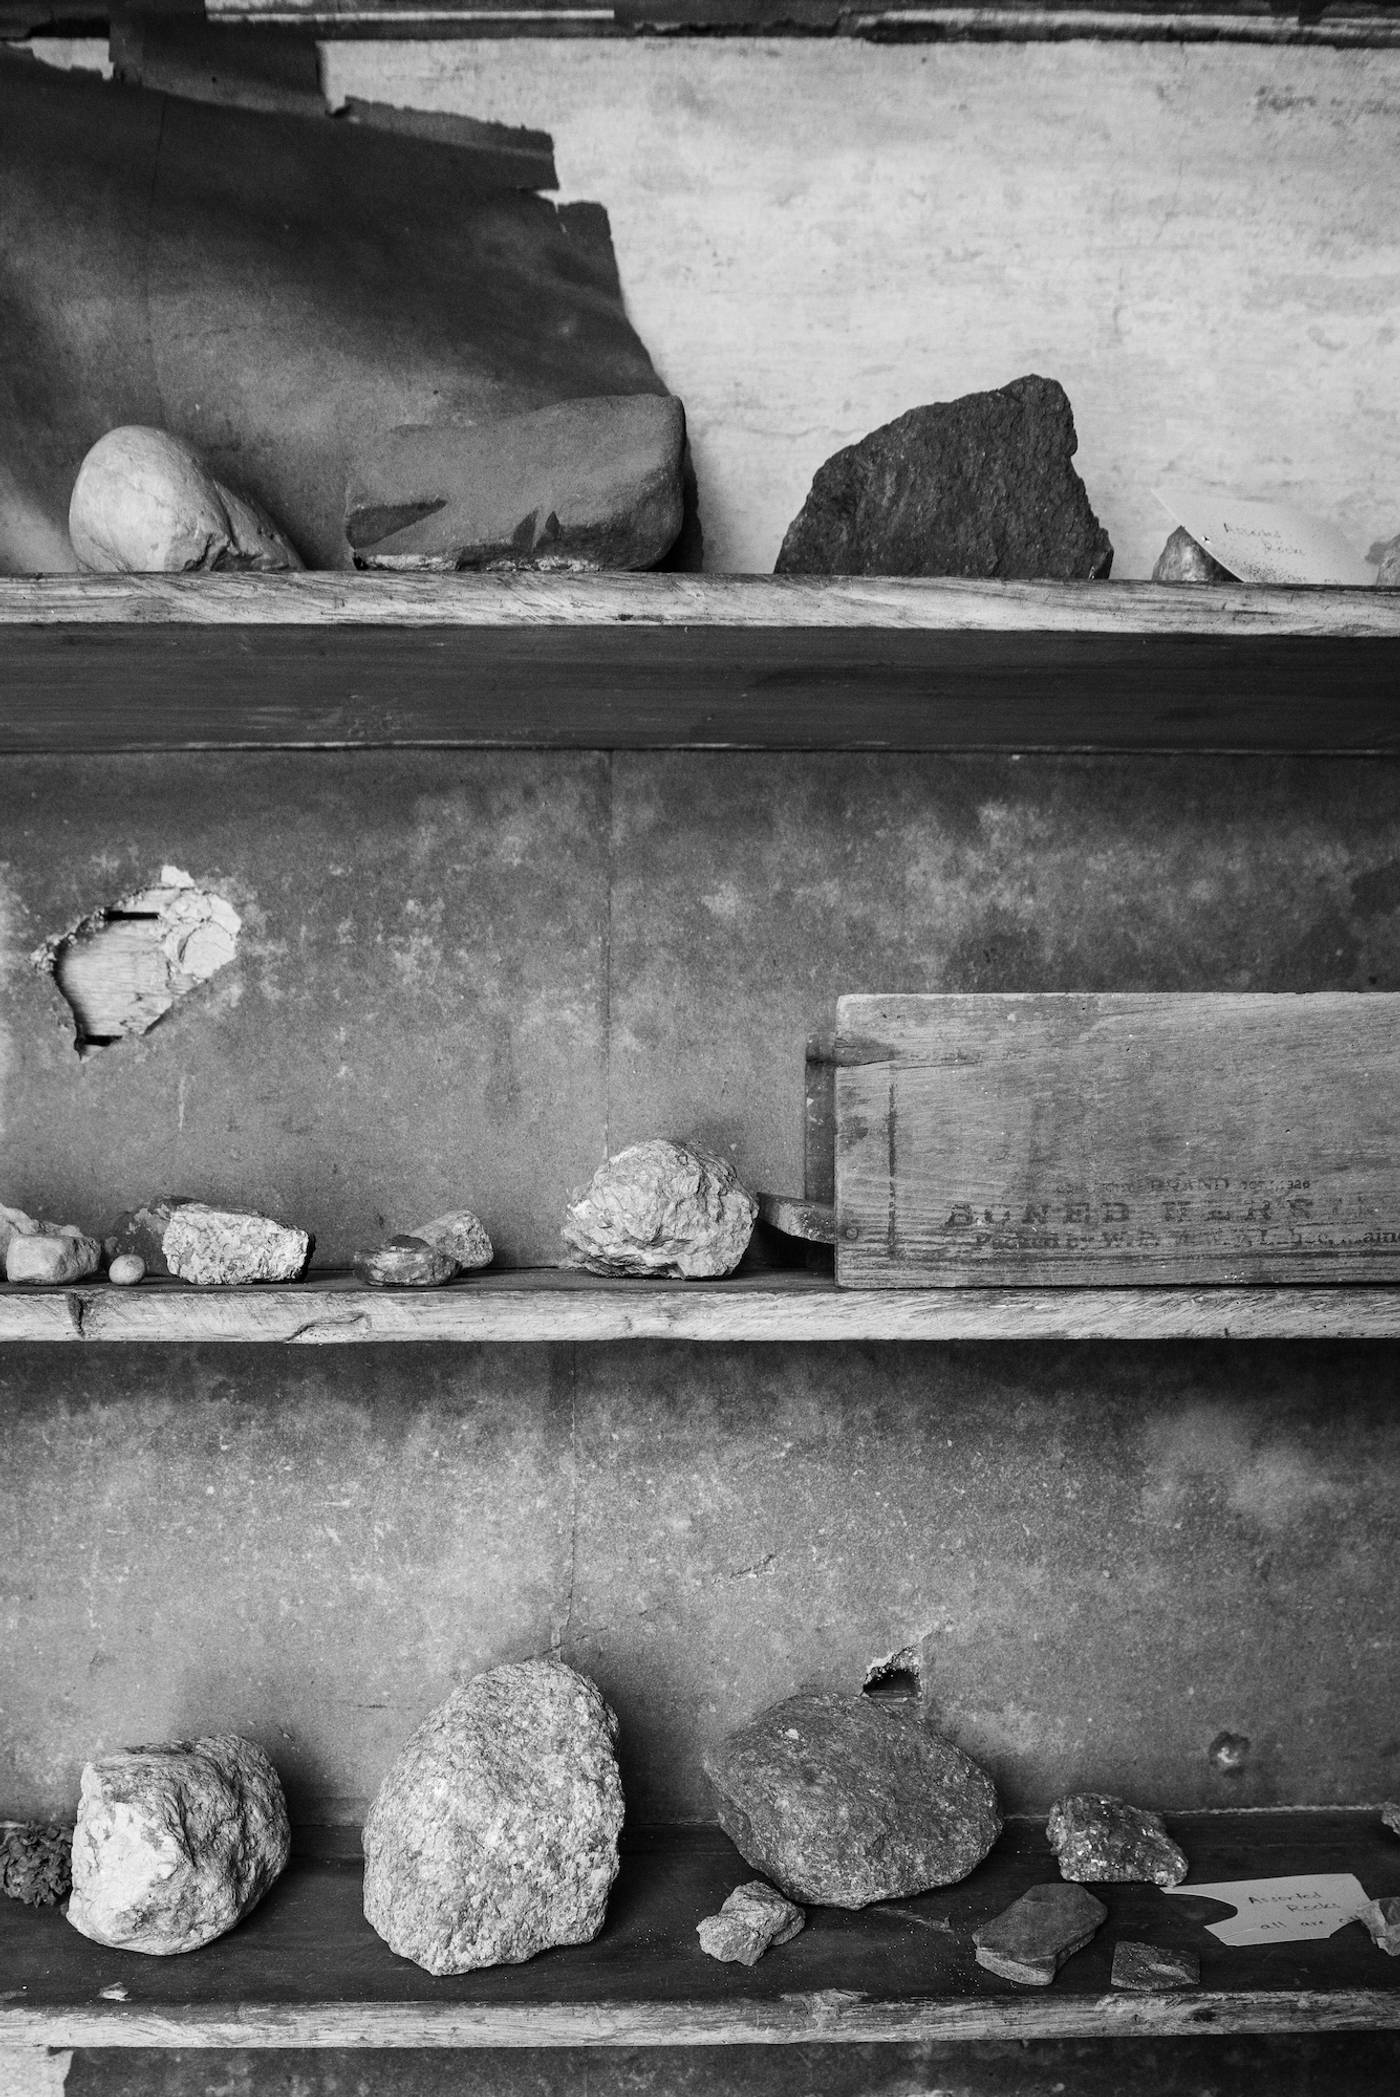 Wooden shelves holding rocks and objects